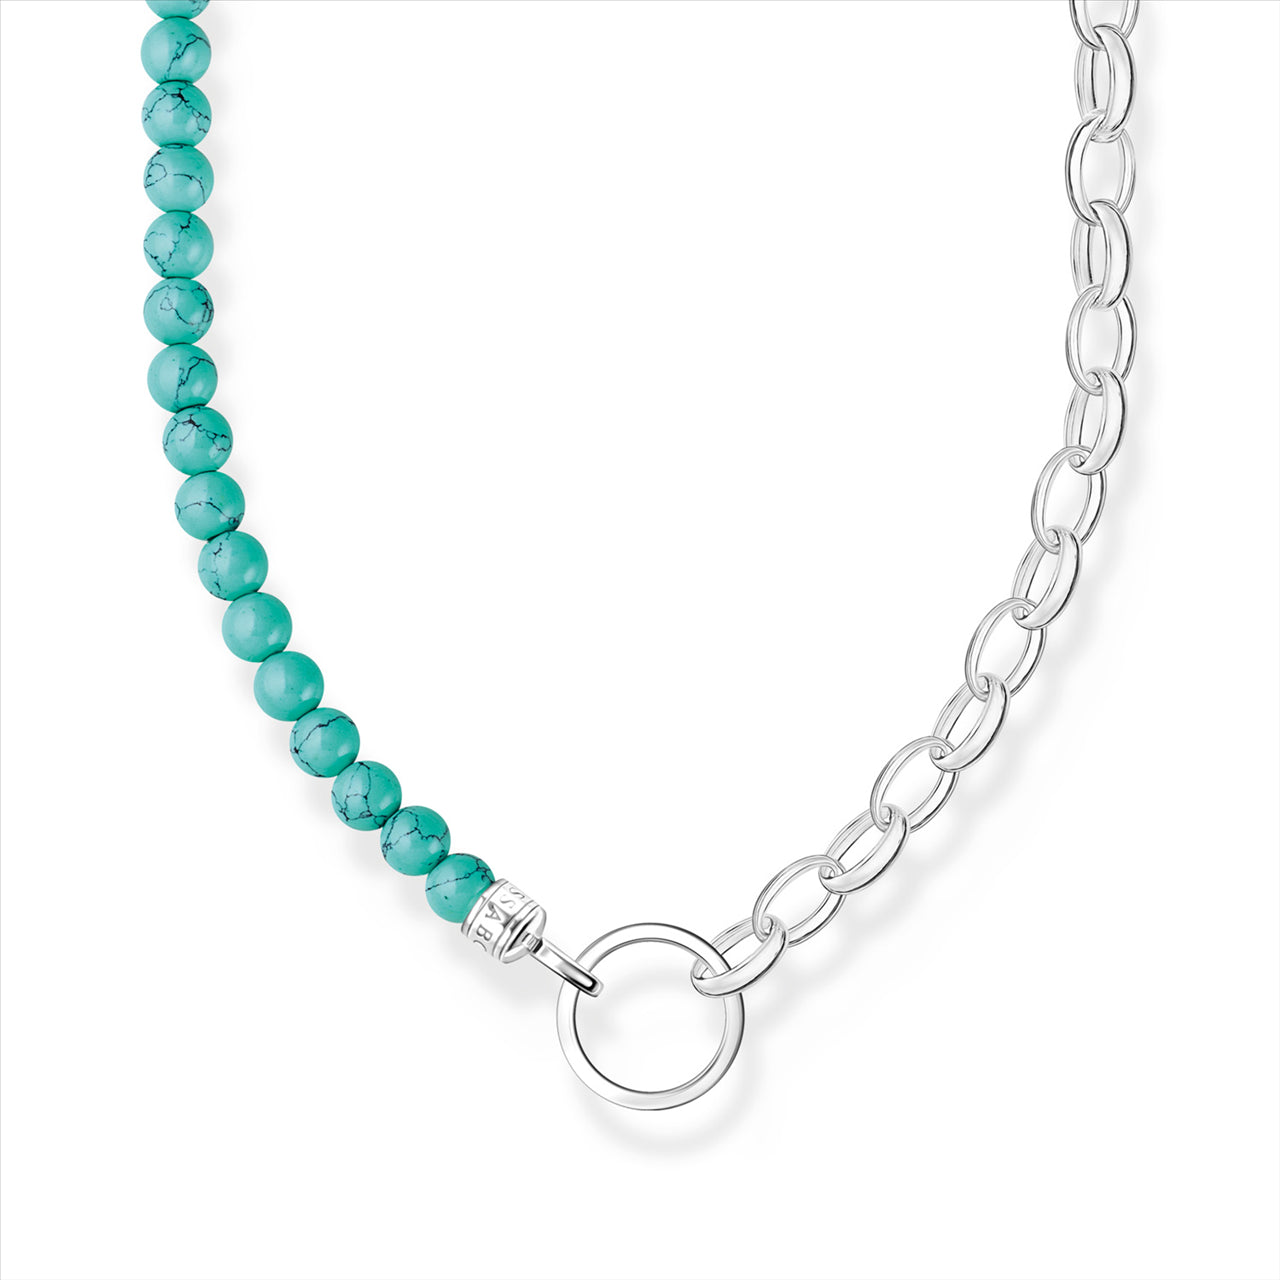 Thomas Sabo Charm Club Turquoise & Belcher Chain Link Necklace.